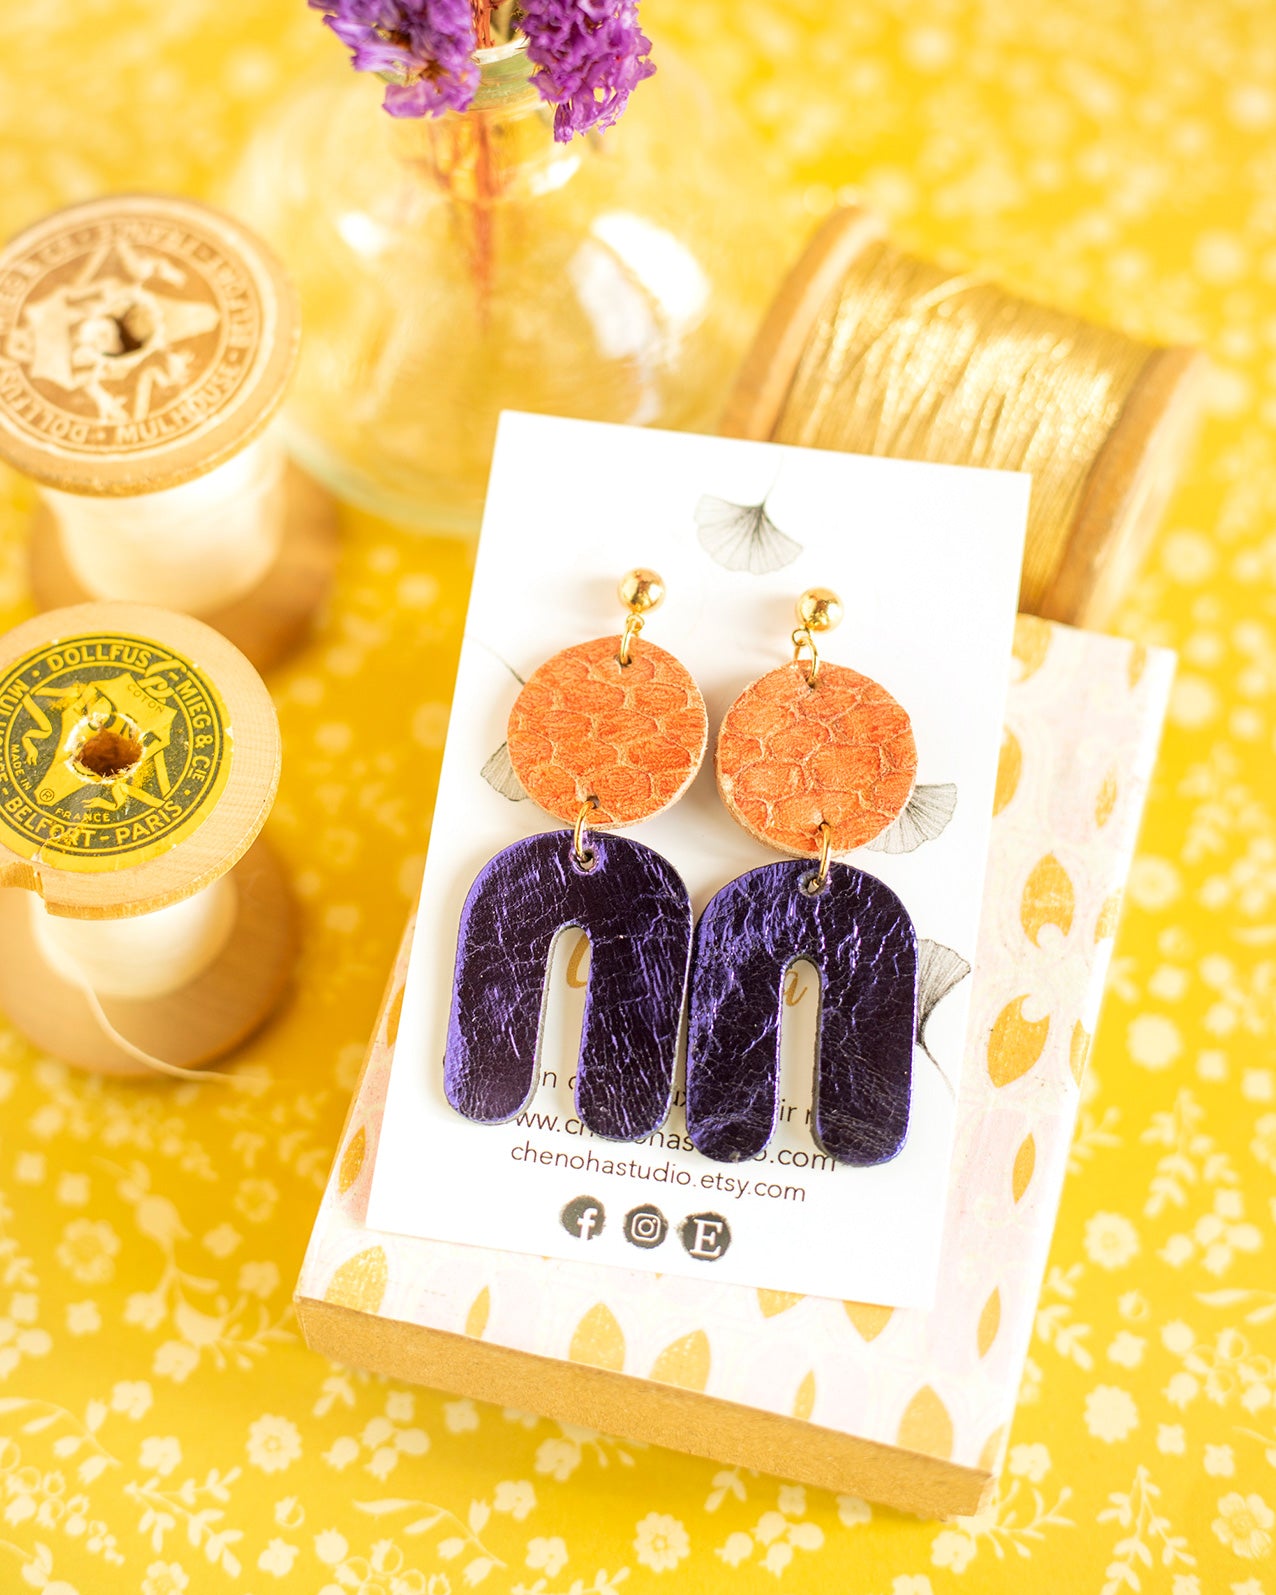 Salomé earrings in salmon pink and purple leather